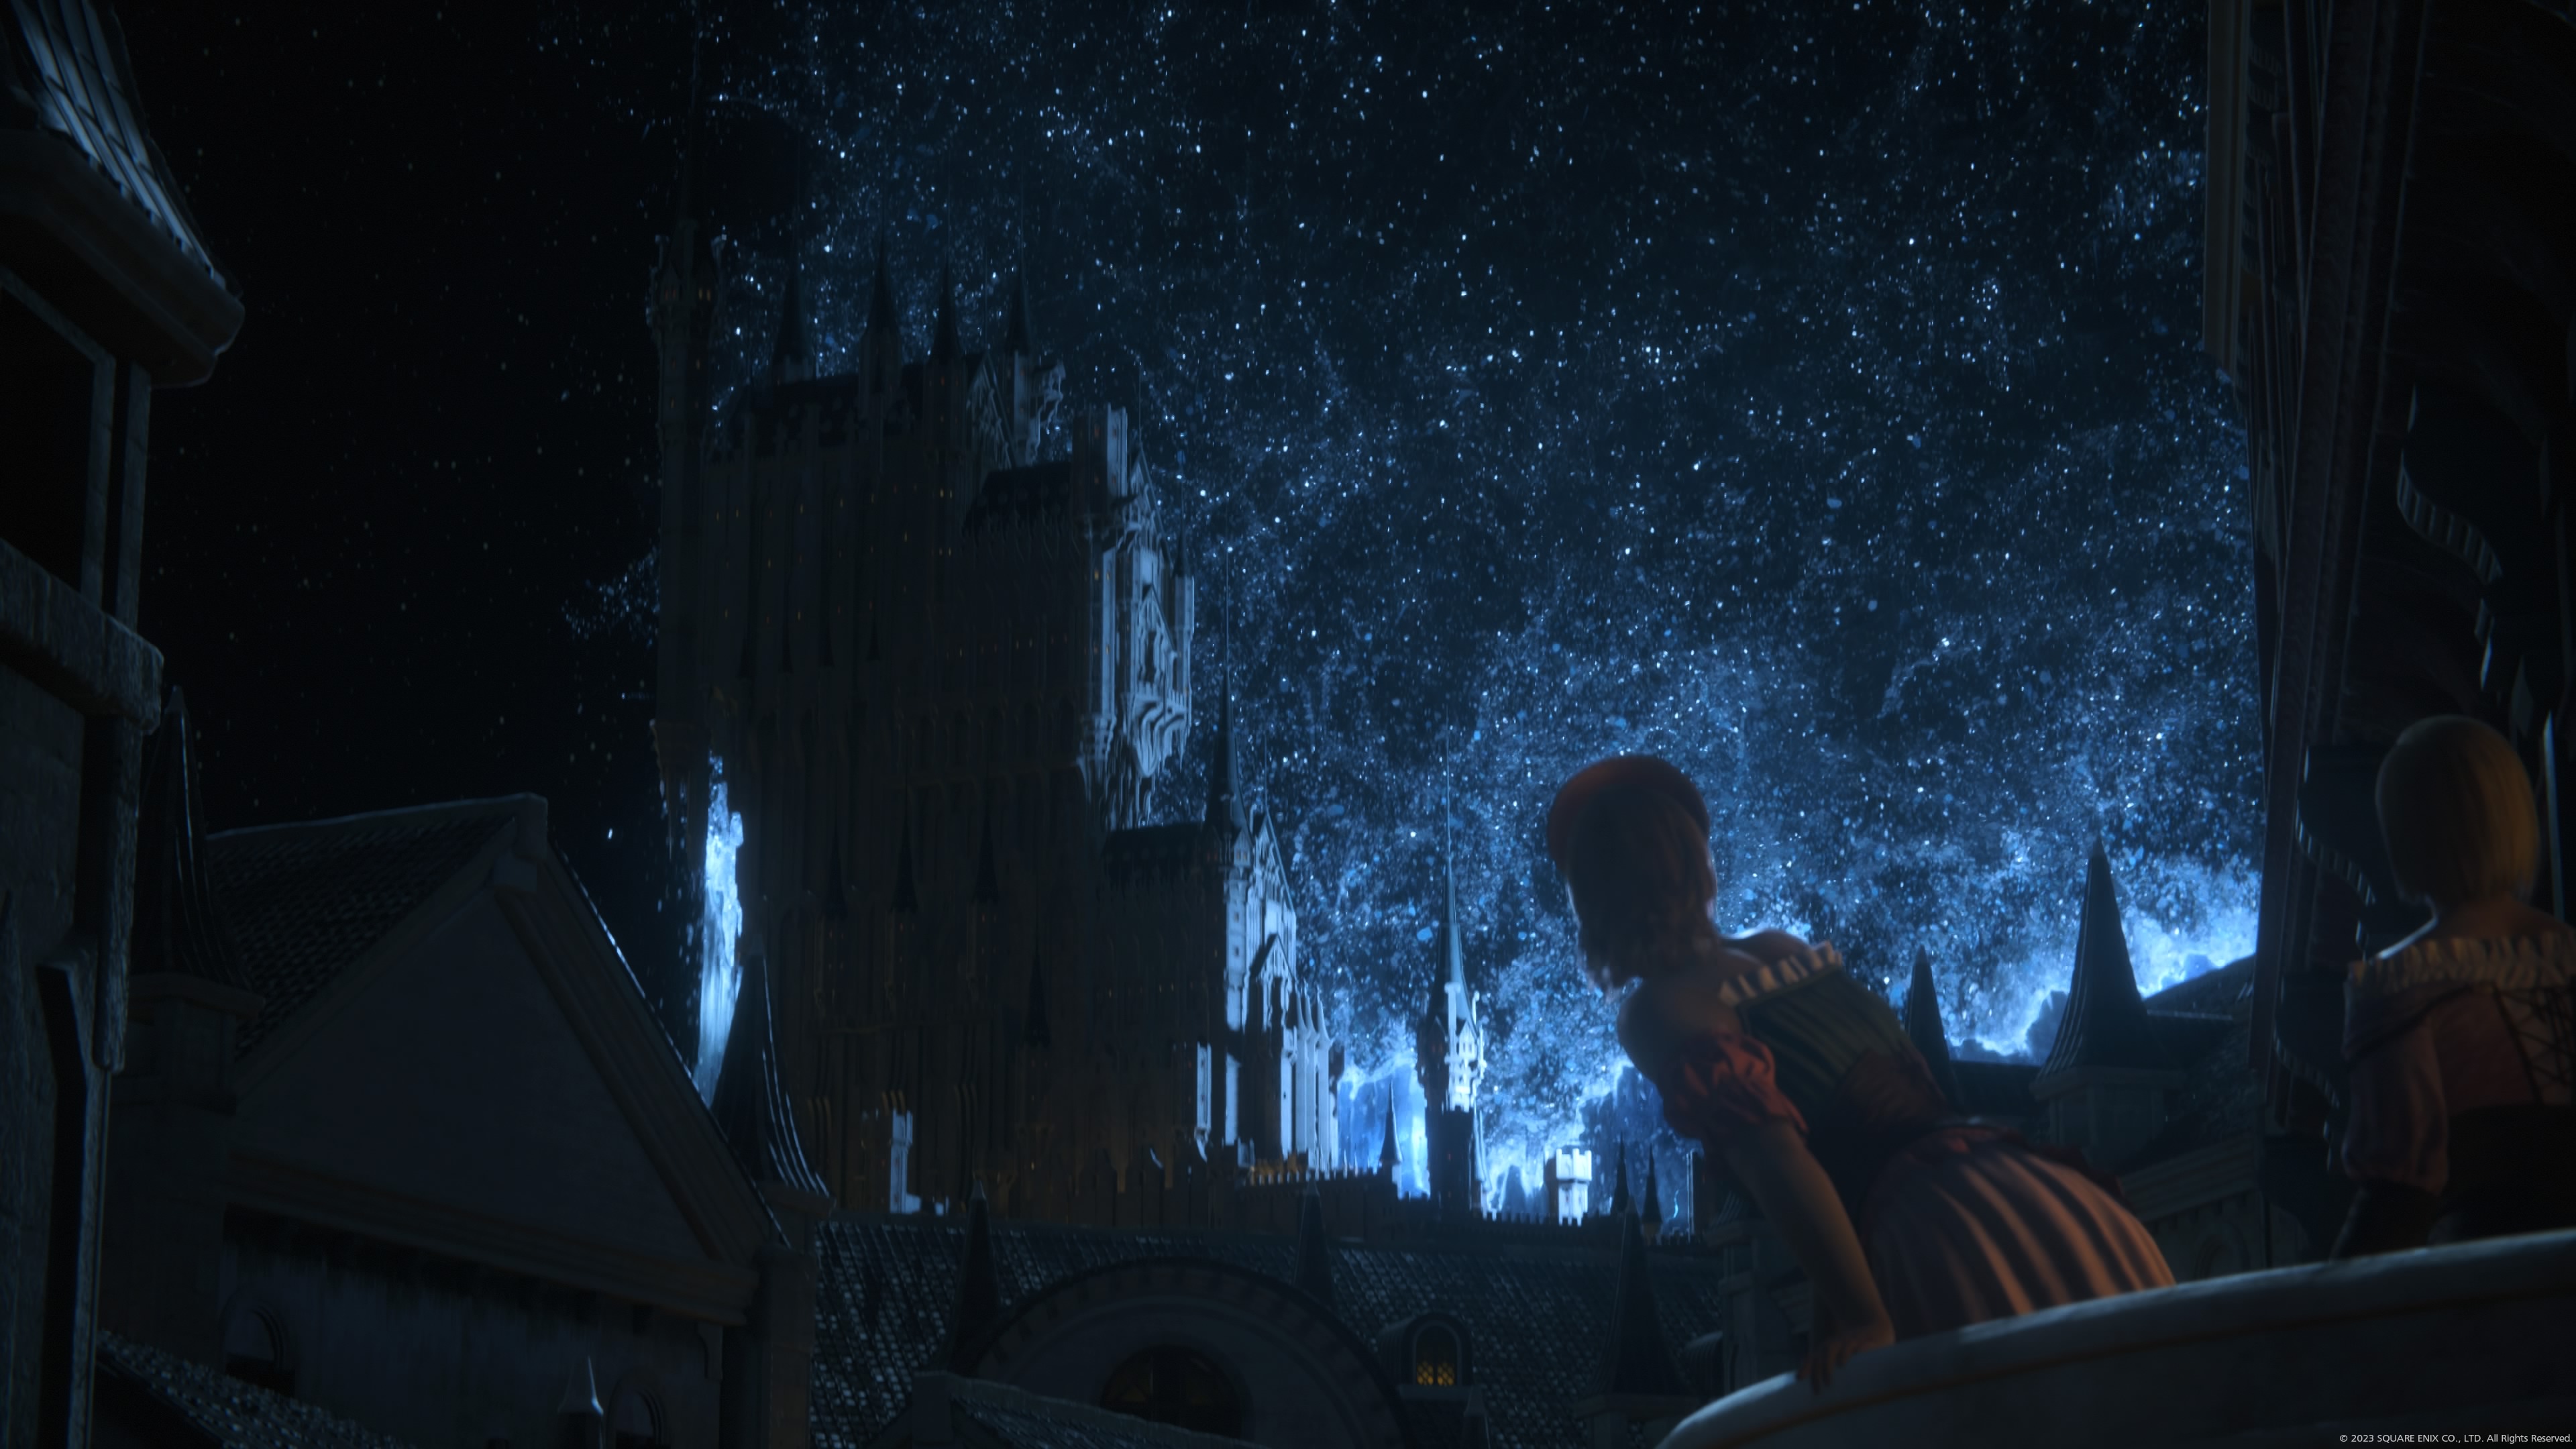 General 3840x2160 Final Fantasy XVI Square Enix crystal  castle medieval stars night night sky architecture landscape medieval art gothic architecture blonde balcony Playstation 5 PlayStation 4K gaming video games clear sky PlayStation Share black background bright Final Fantasy